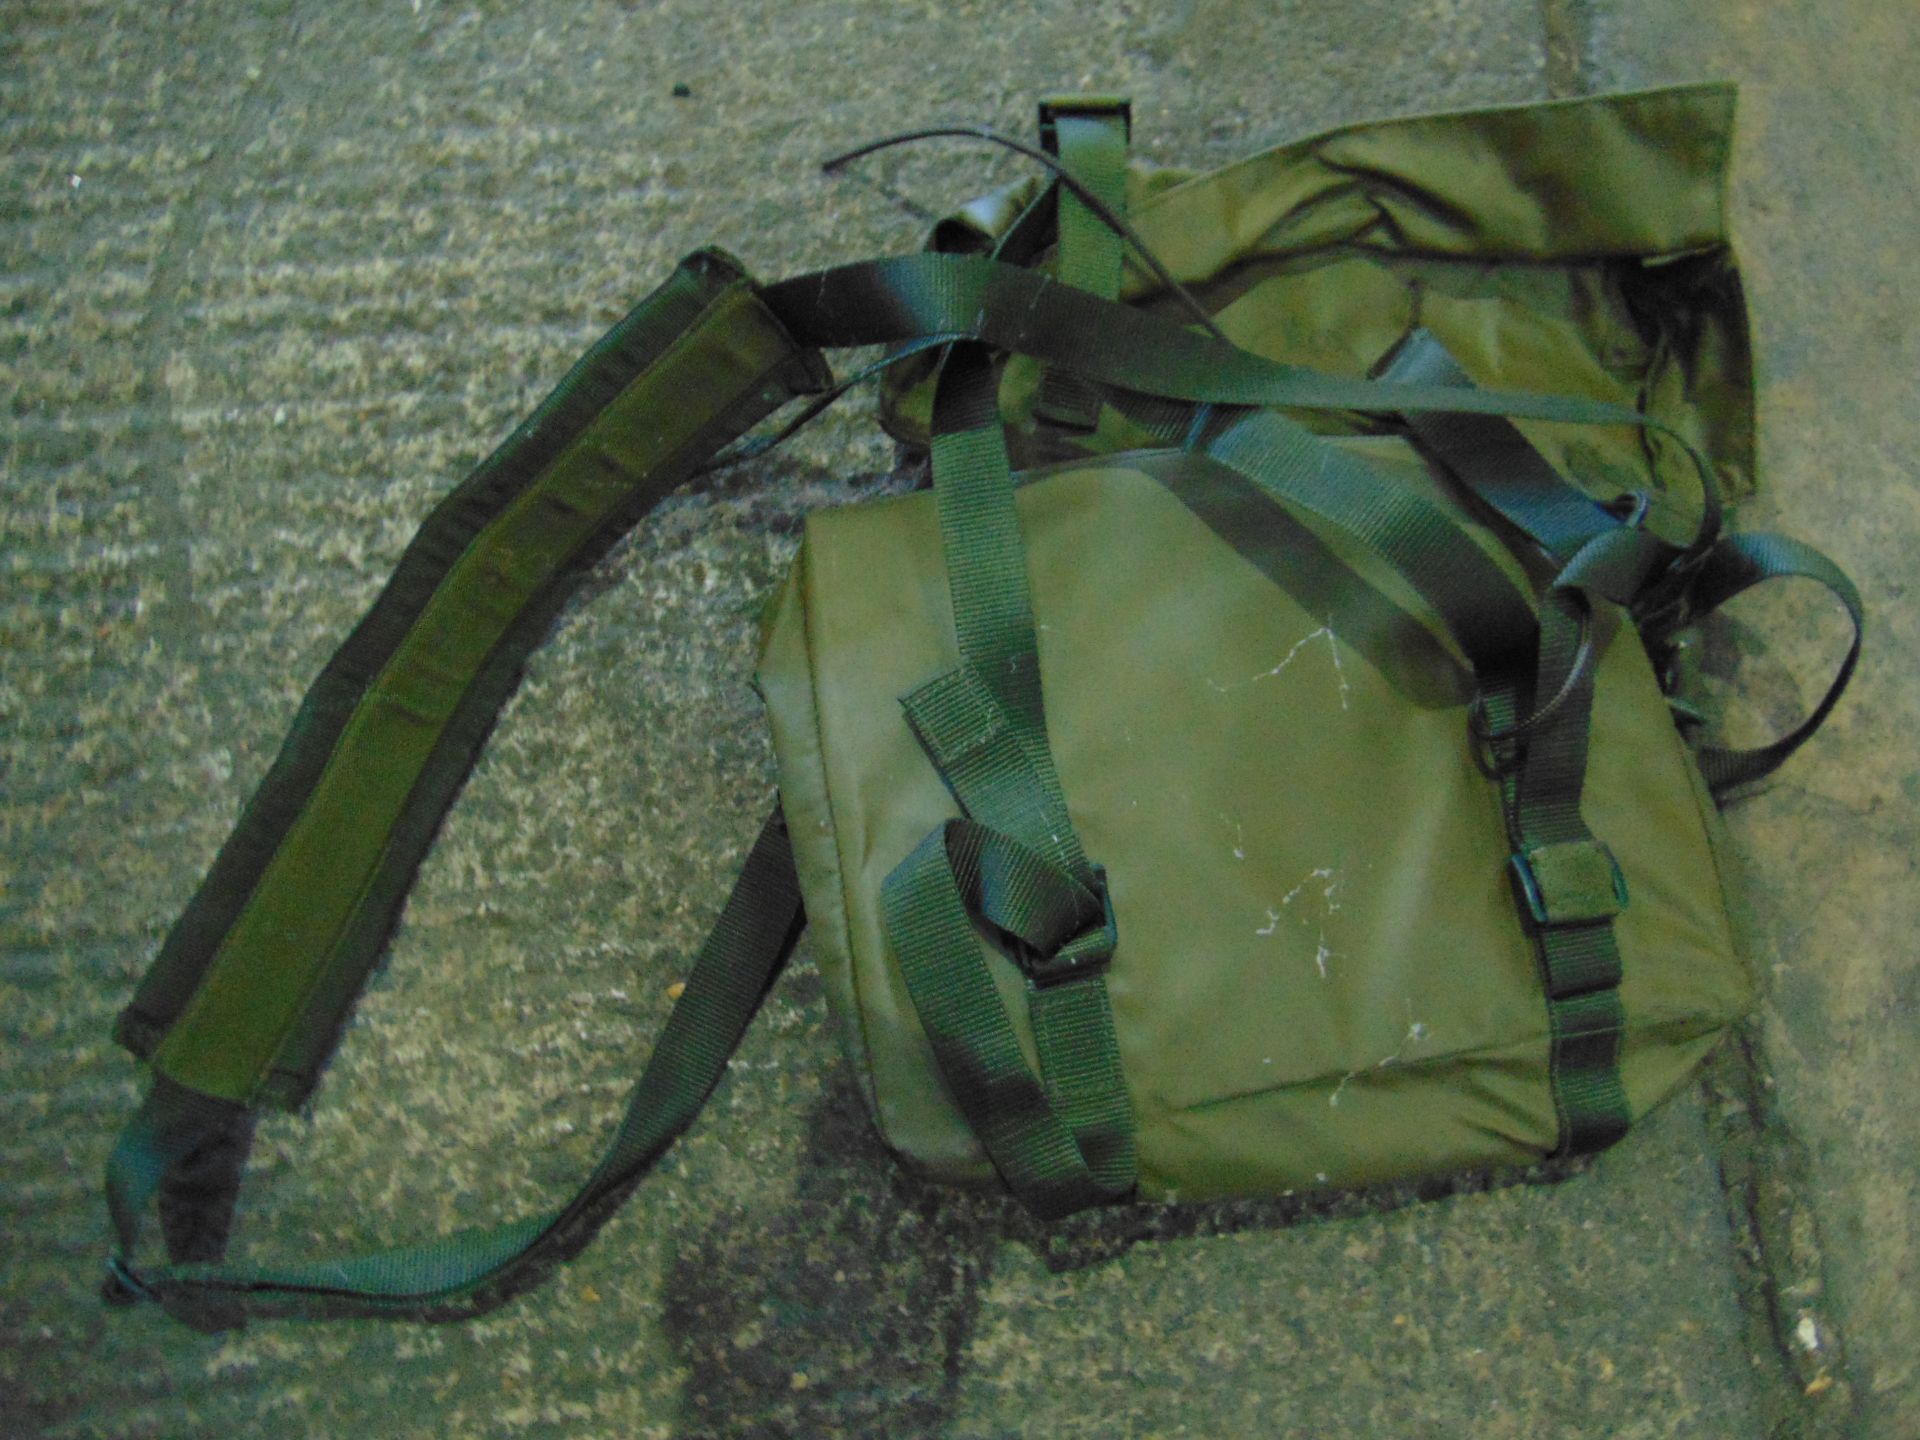 1X STILLAGE OF COMMS BAGS, ANTENA COVERS, ETC - Image 4 of 9